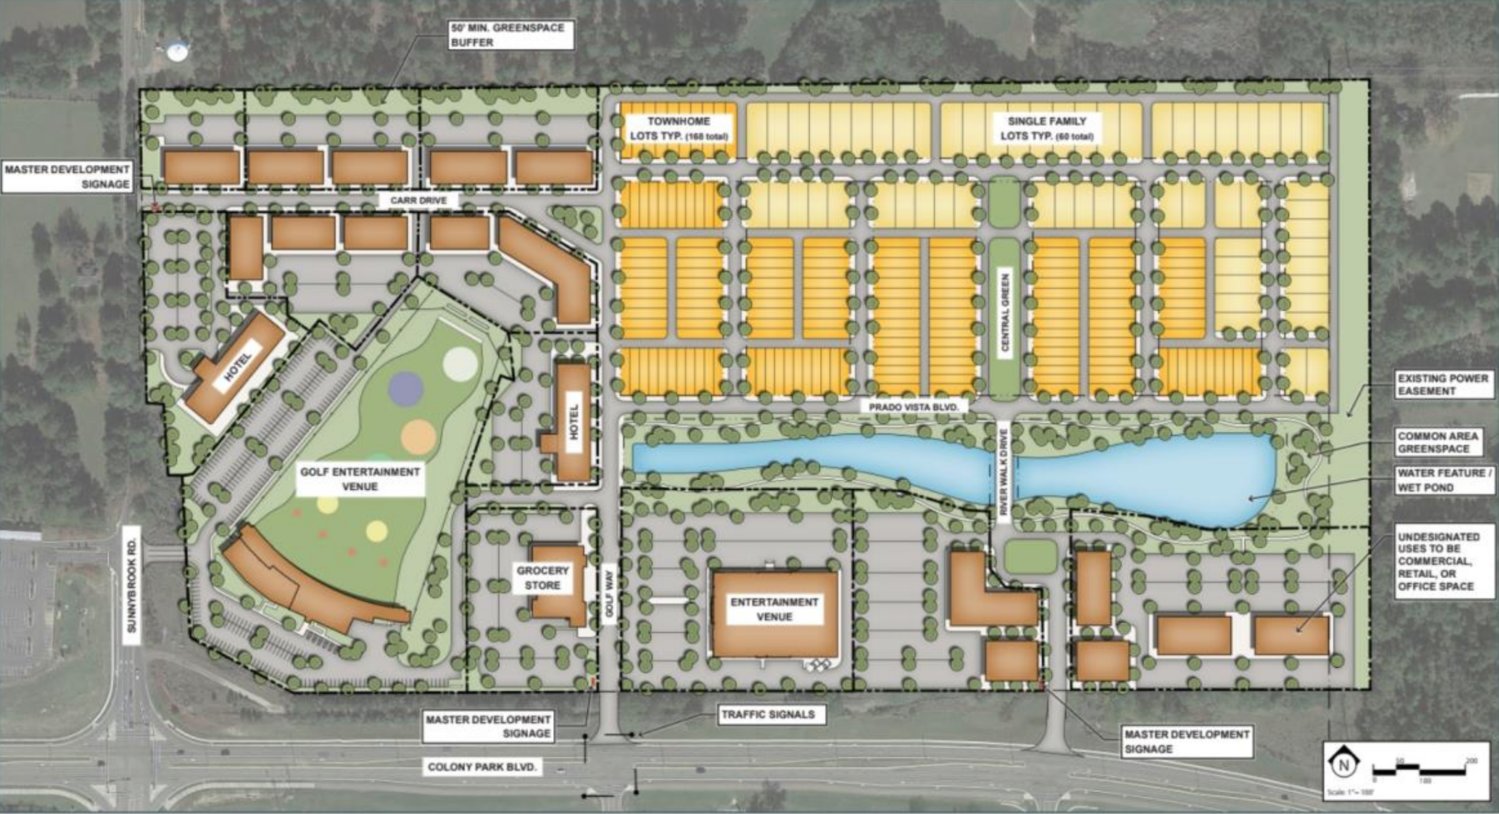 A site plan for Prado Vista includes a golf entertainment venue, grocery store an, hotel and town homes.